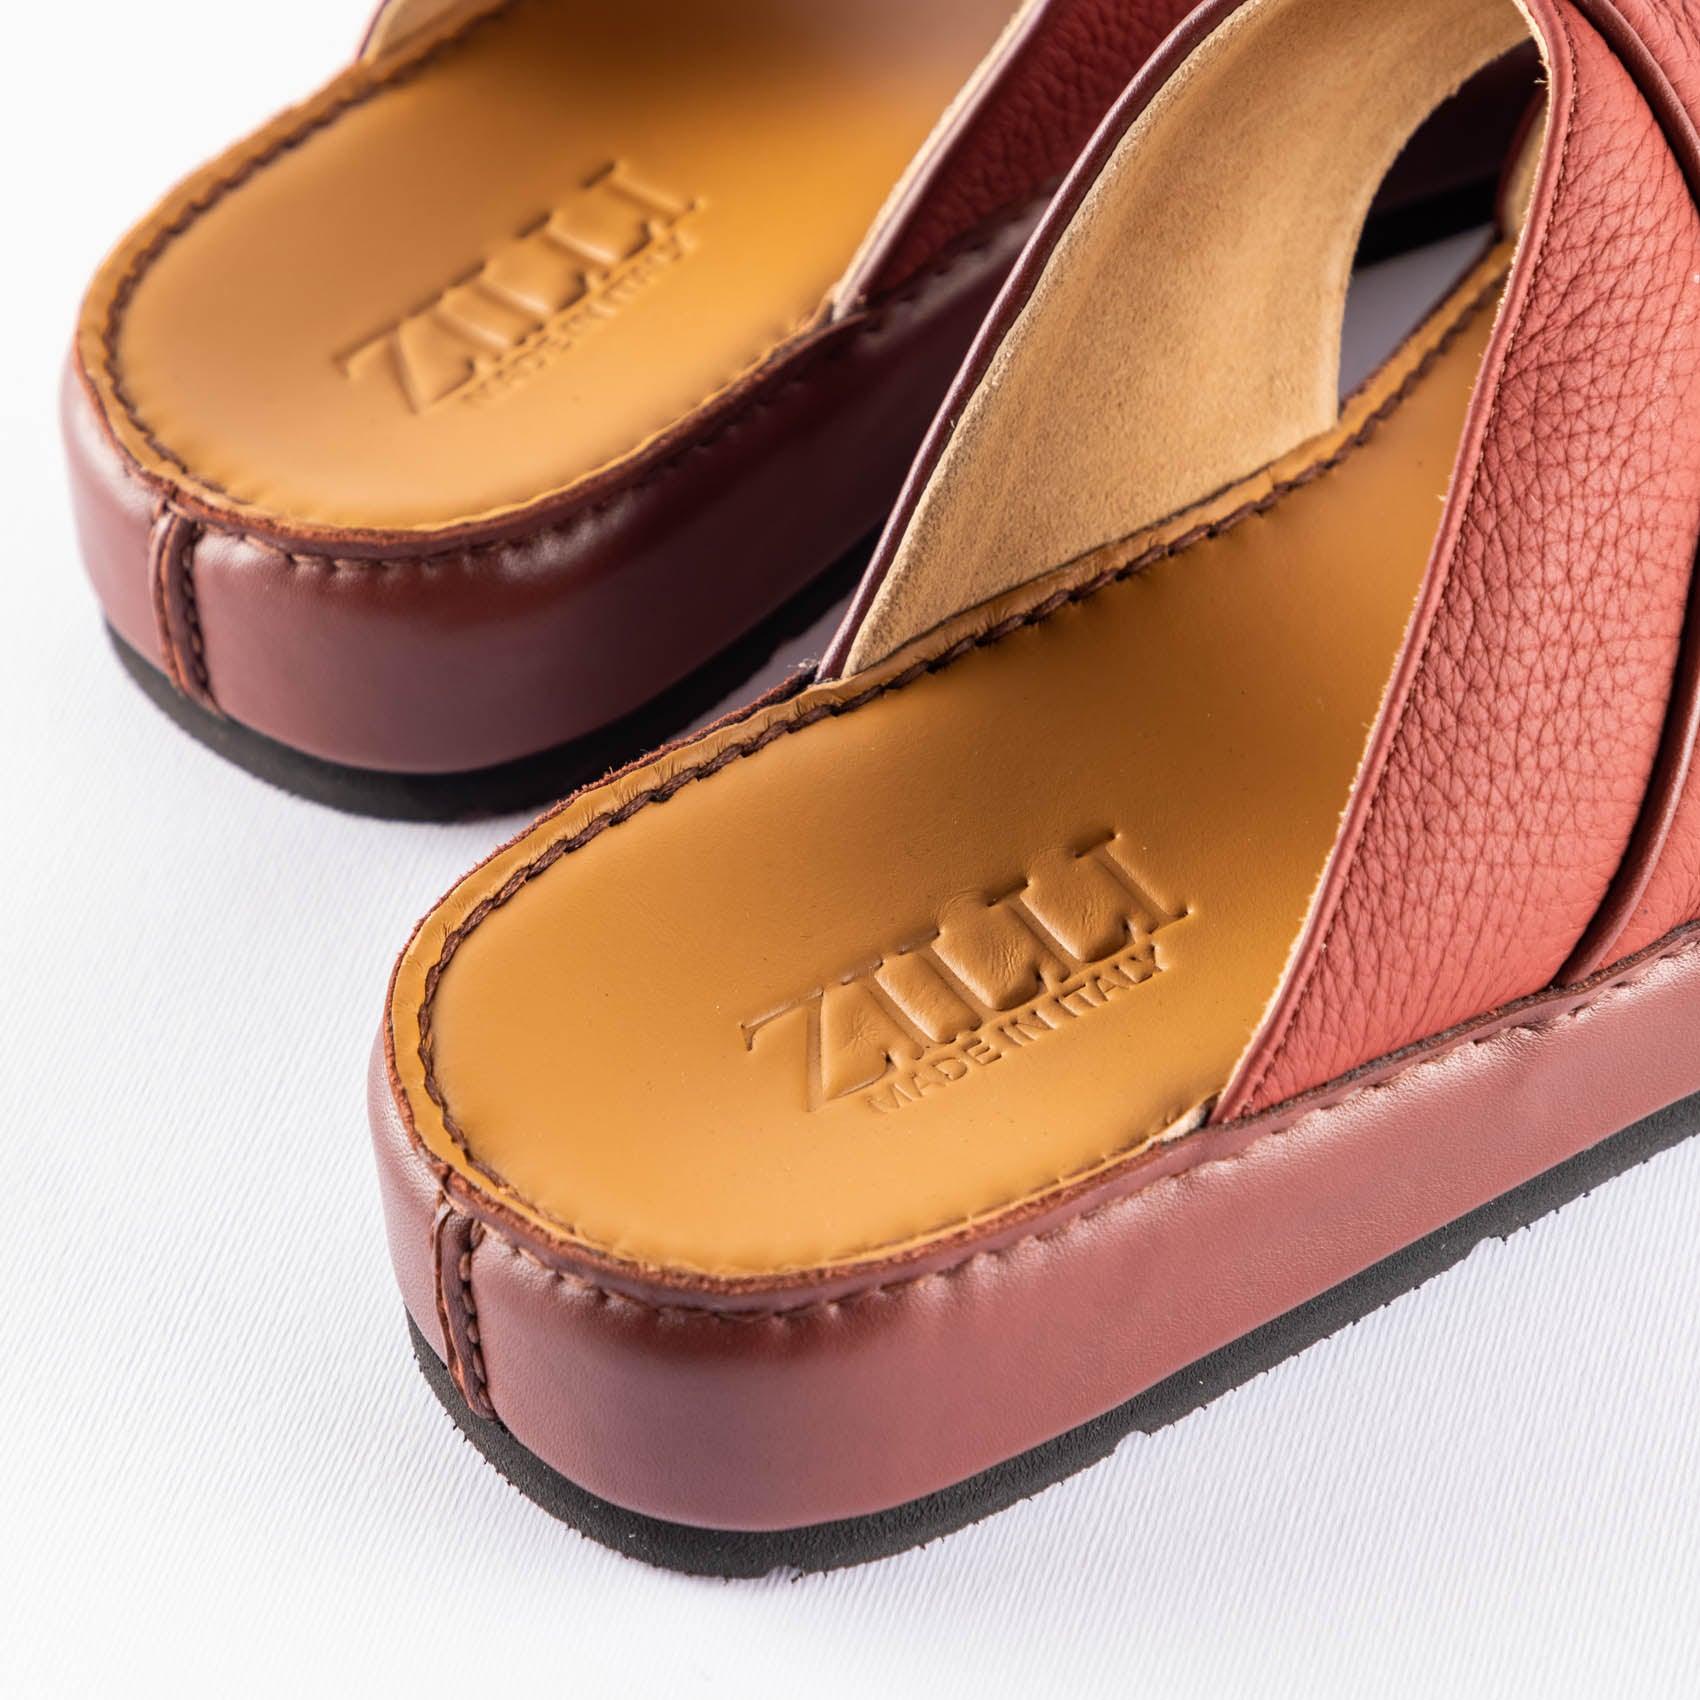 Sandals Arabic style in deer leather - ZILLI